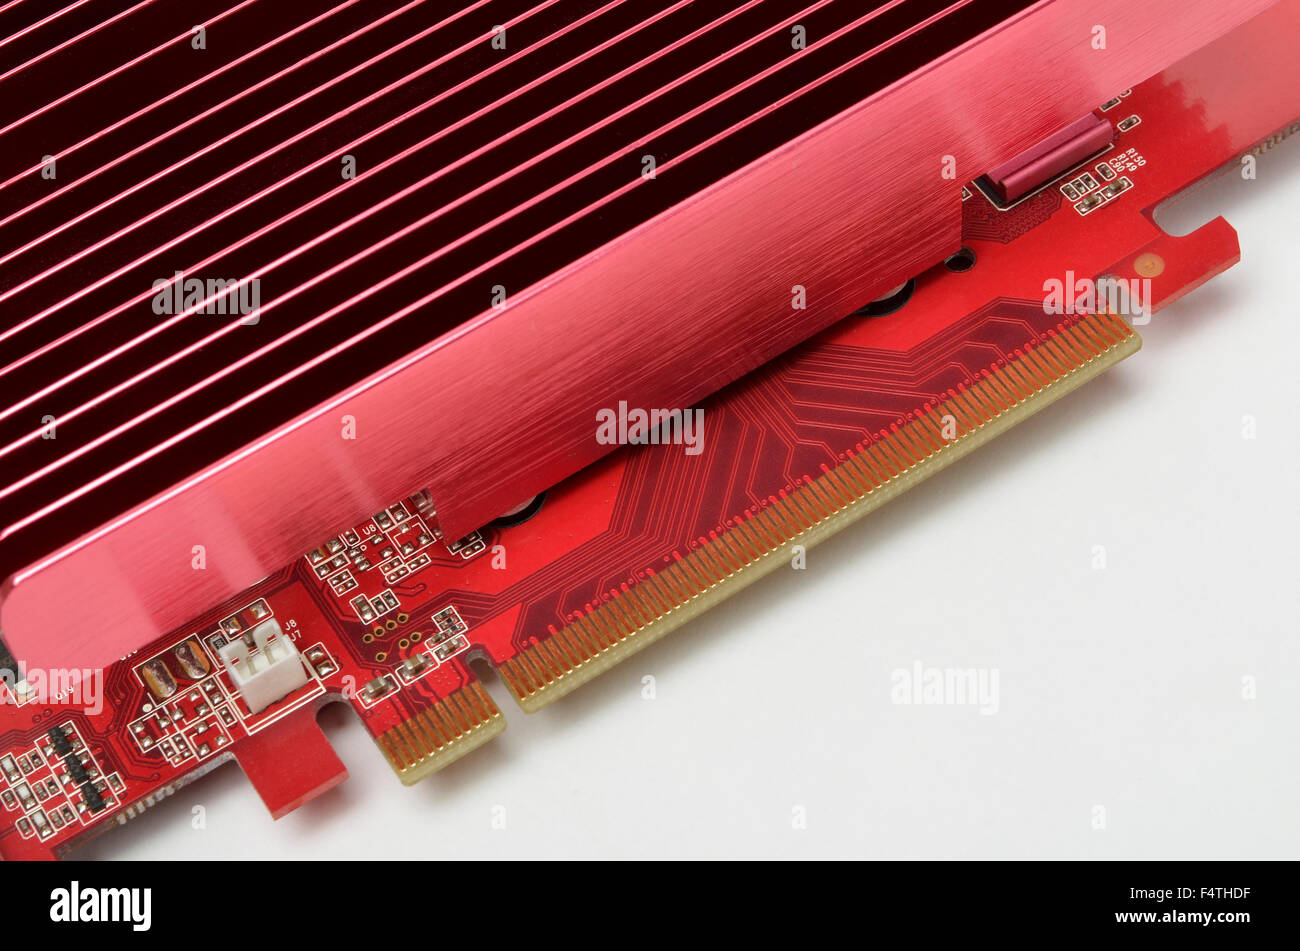 Pci Express X16 Contacts And Heat Sink On A Gainward Nvidia Graphics Card Stock Photo Alamy